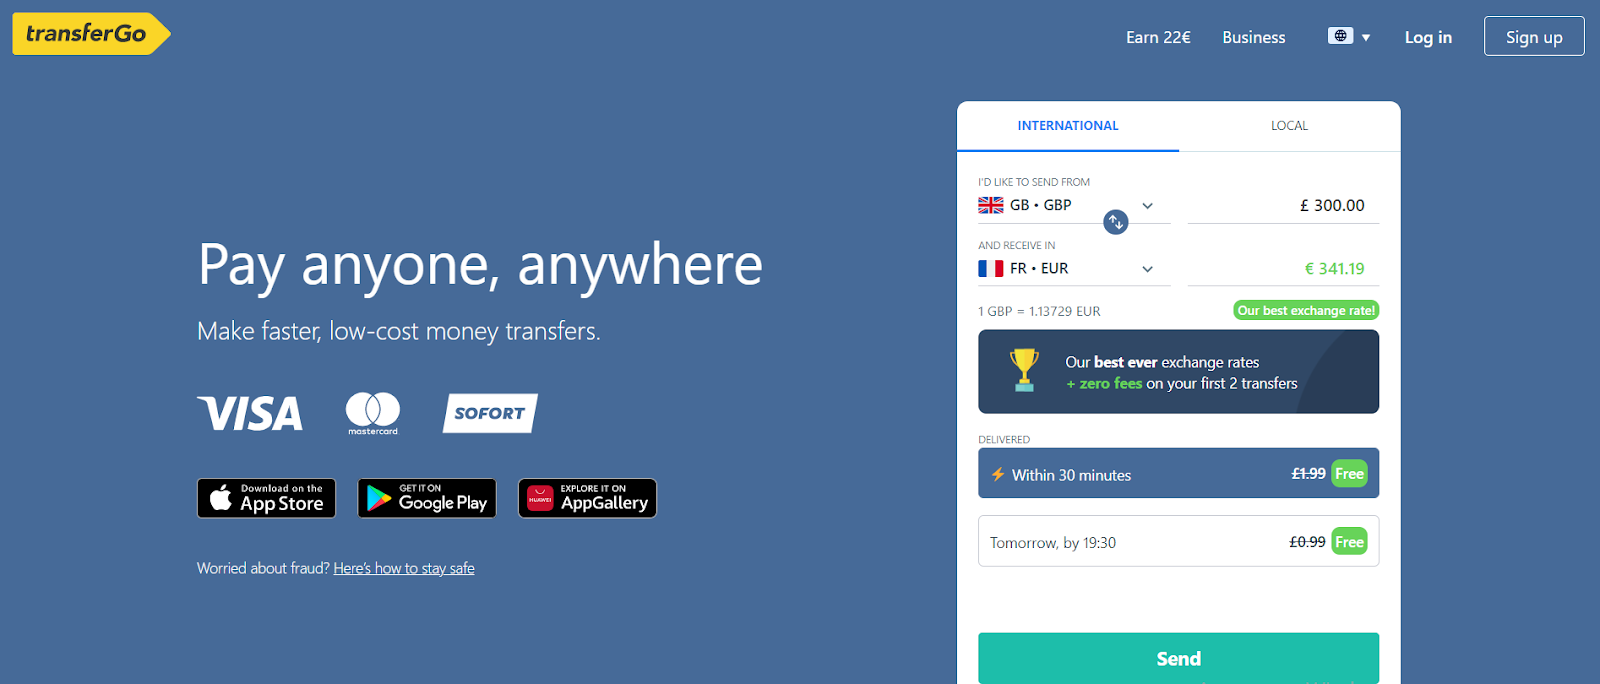 How to open an account at TransferGo